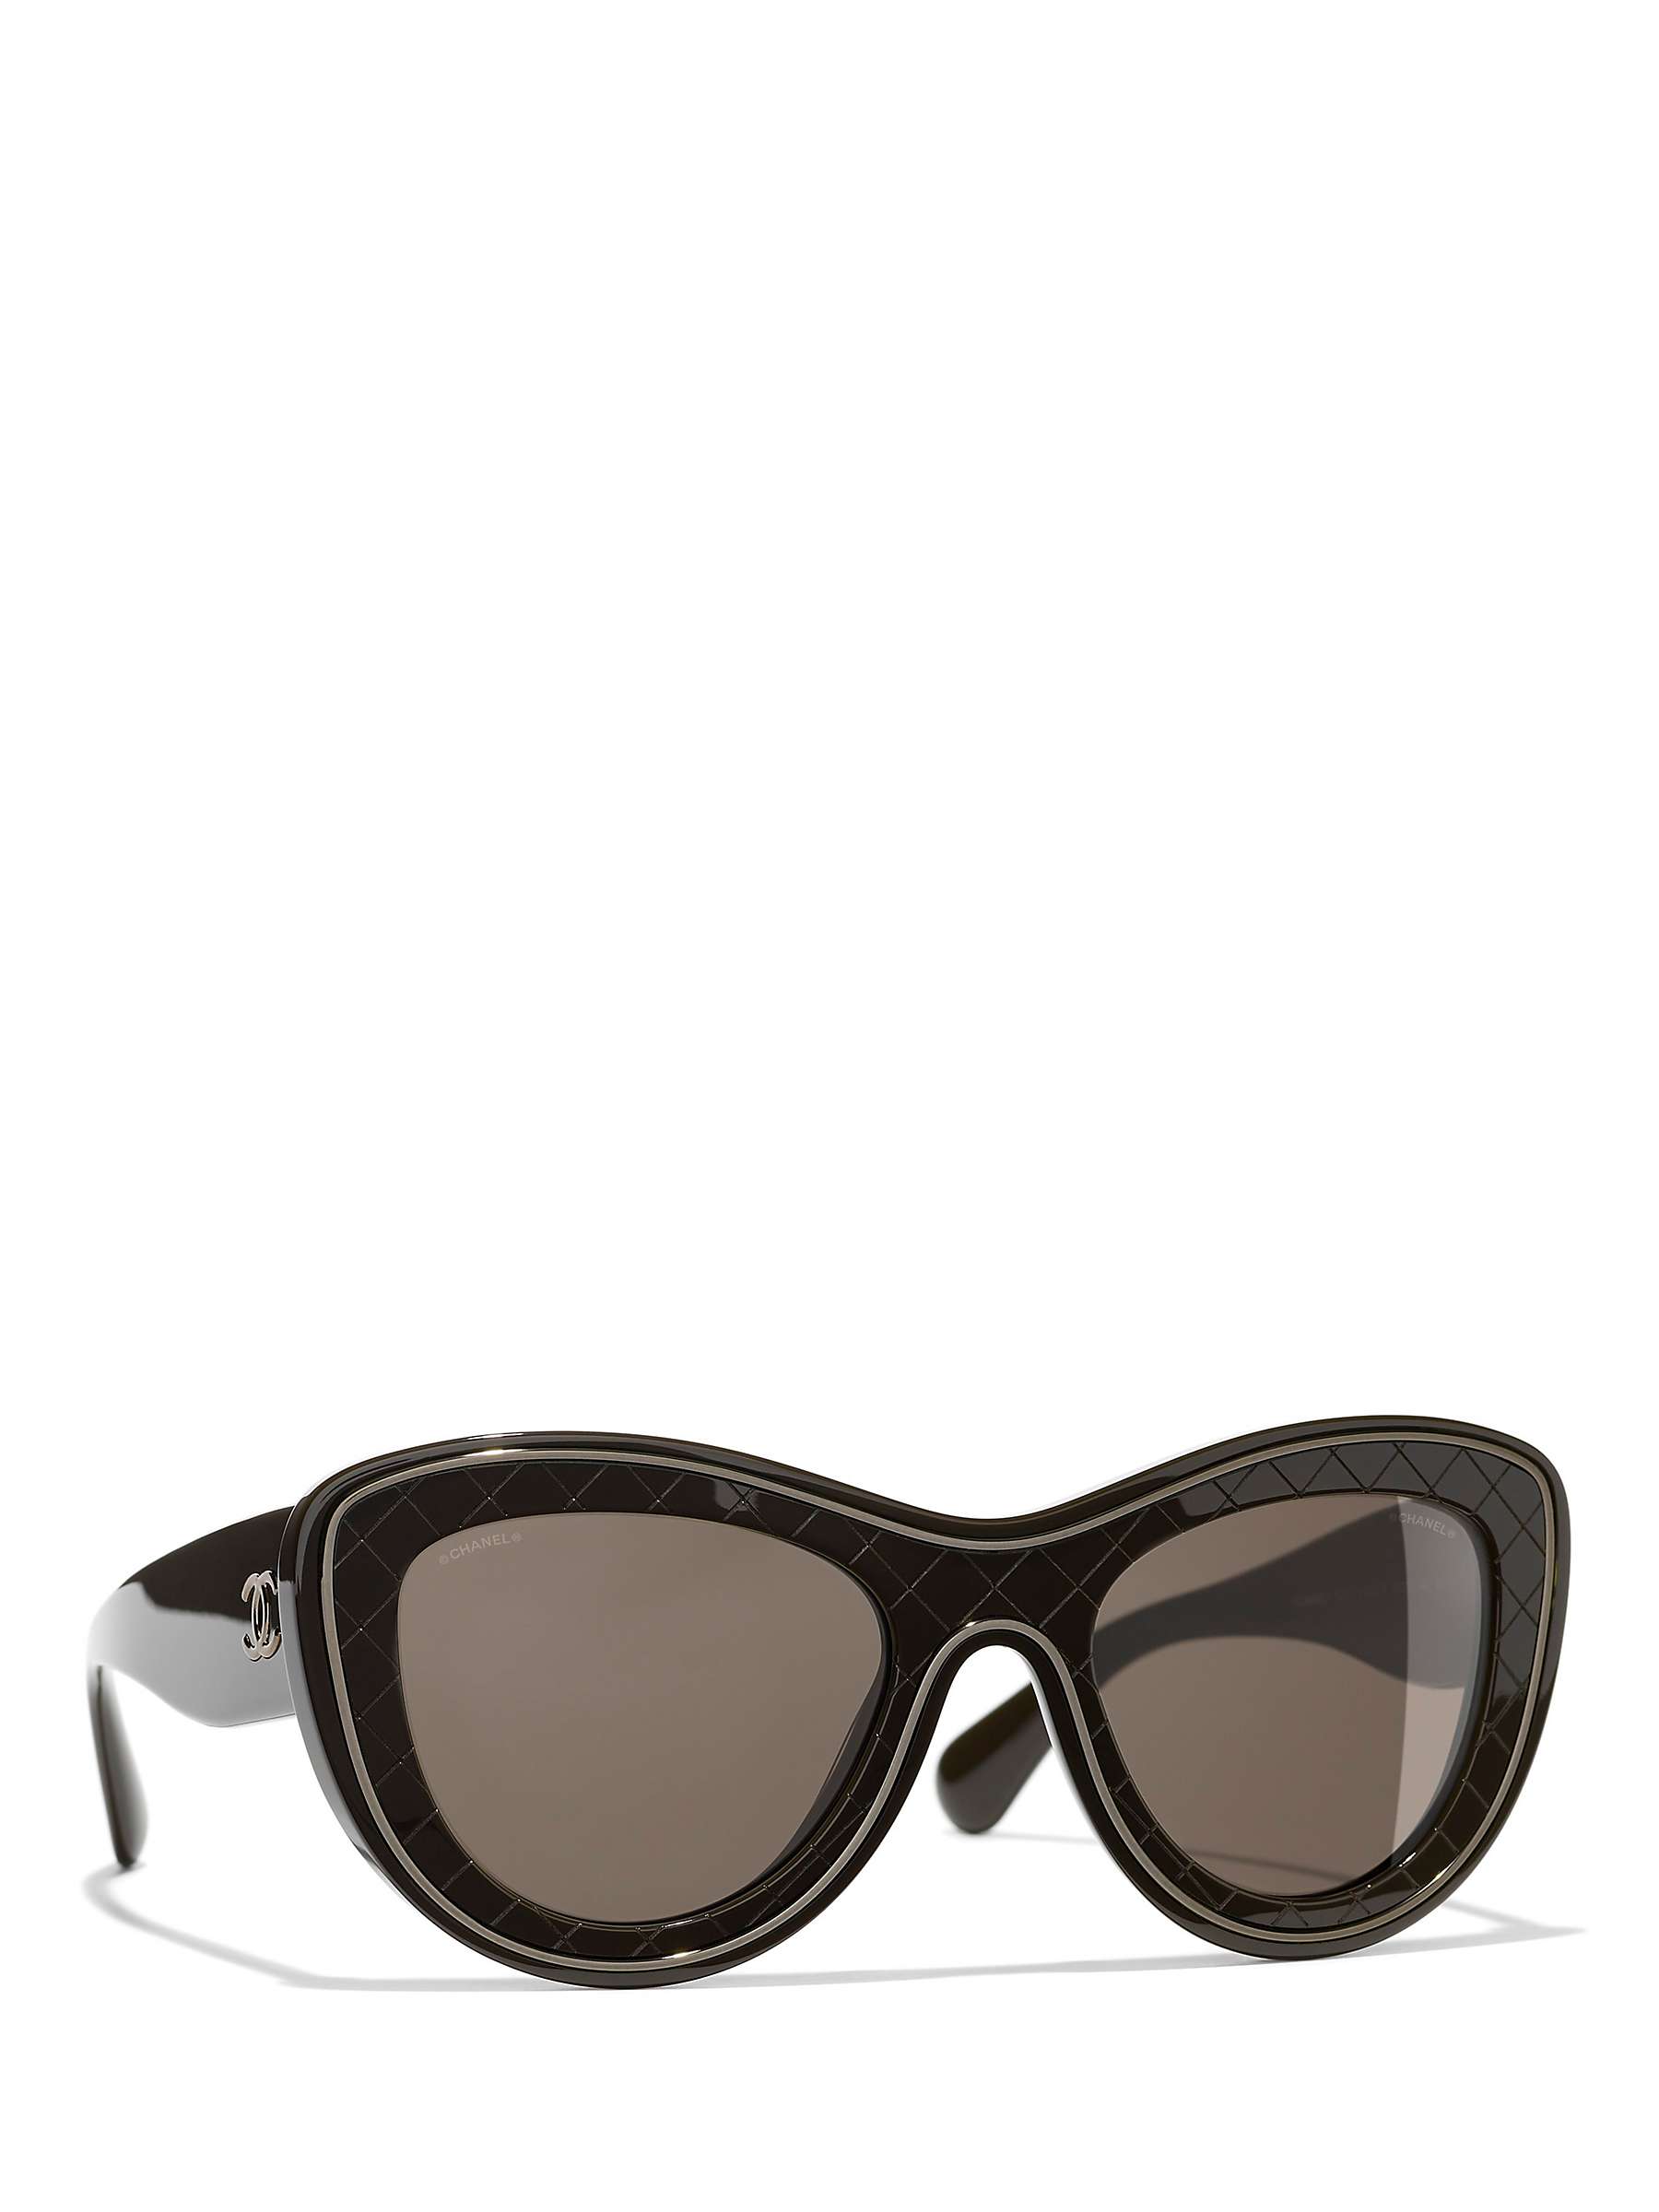 Buy CHANEL Butterfly Sunglasses CH5397 Brown/Brown Gradient Online at johnlewis.com